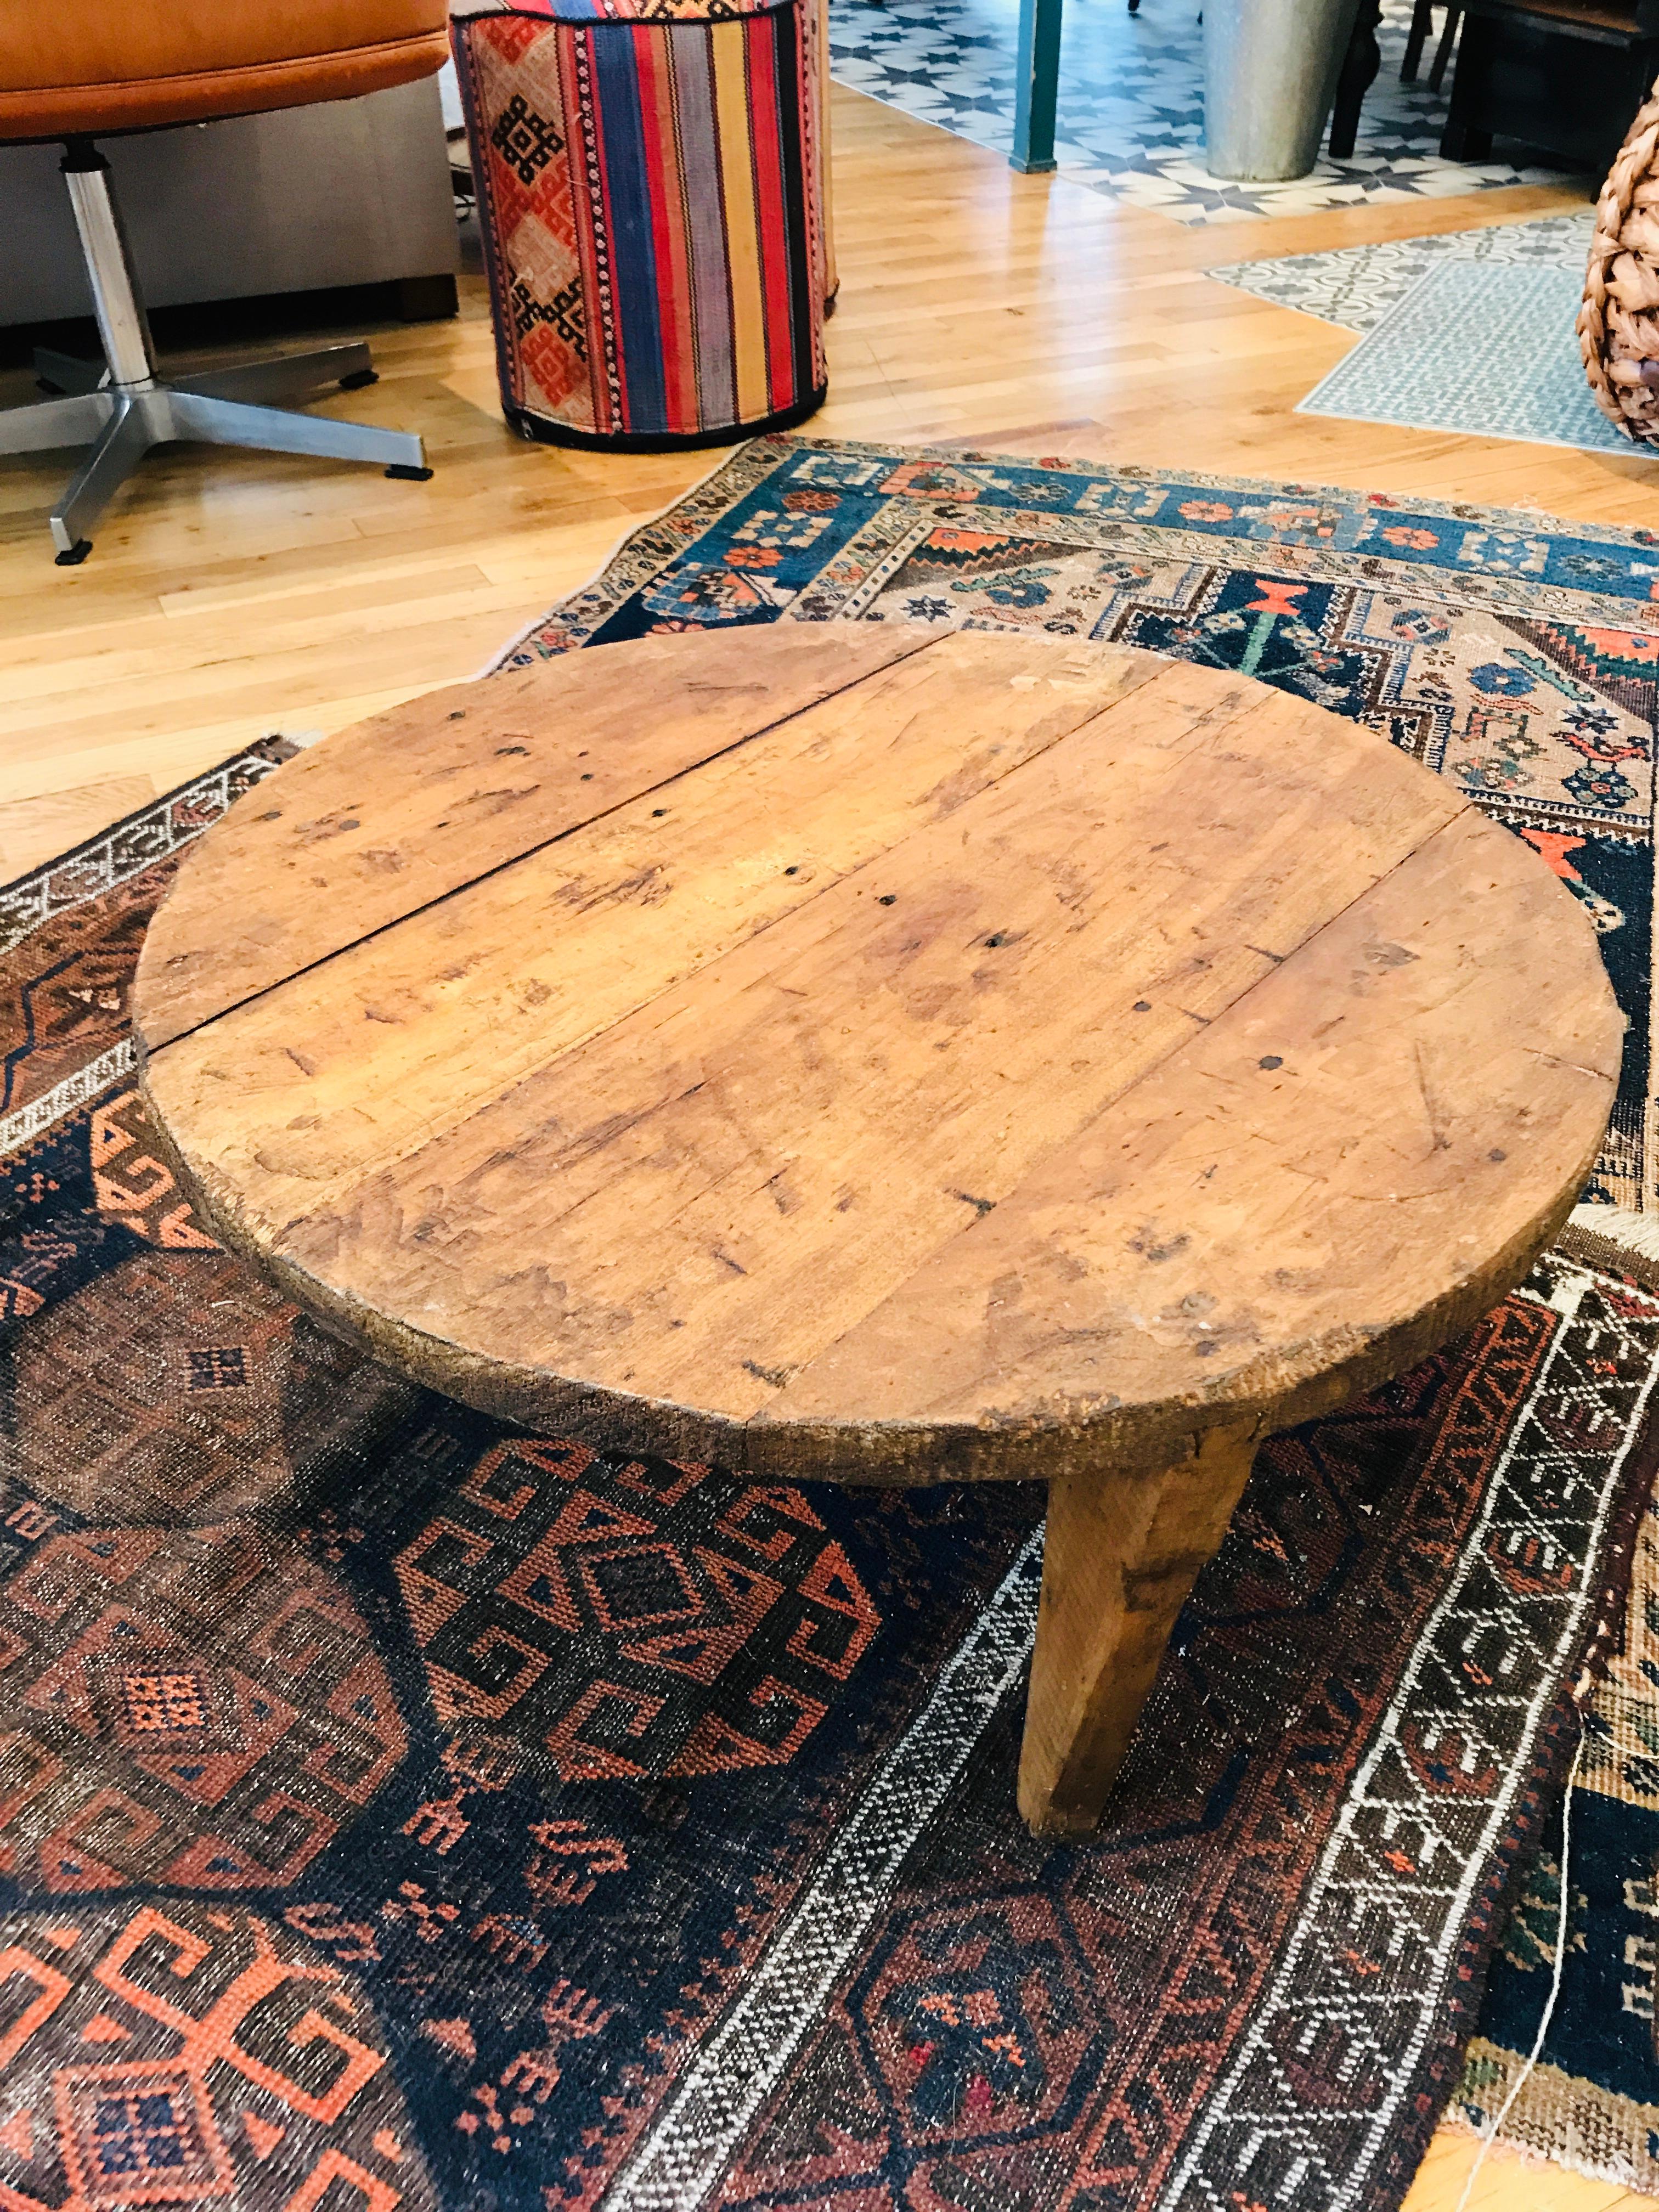 A low sitting vintage French side table with natural oak exposed. Perfect for a effortless, relaxed and earthy setting. This side table will compliment any bohemian seating area.